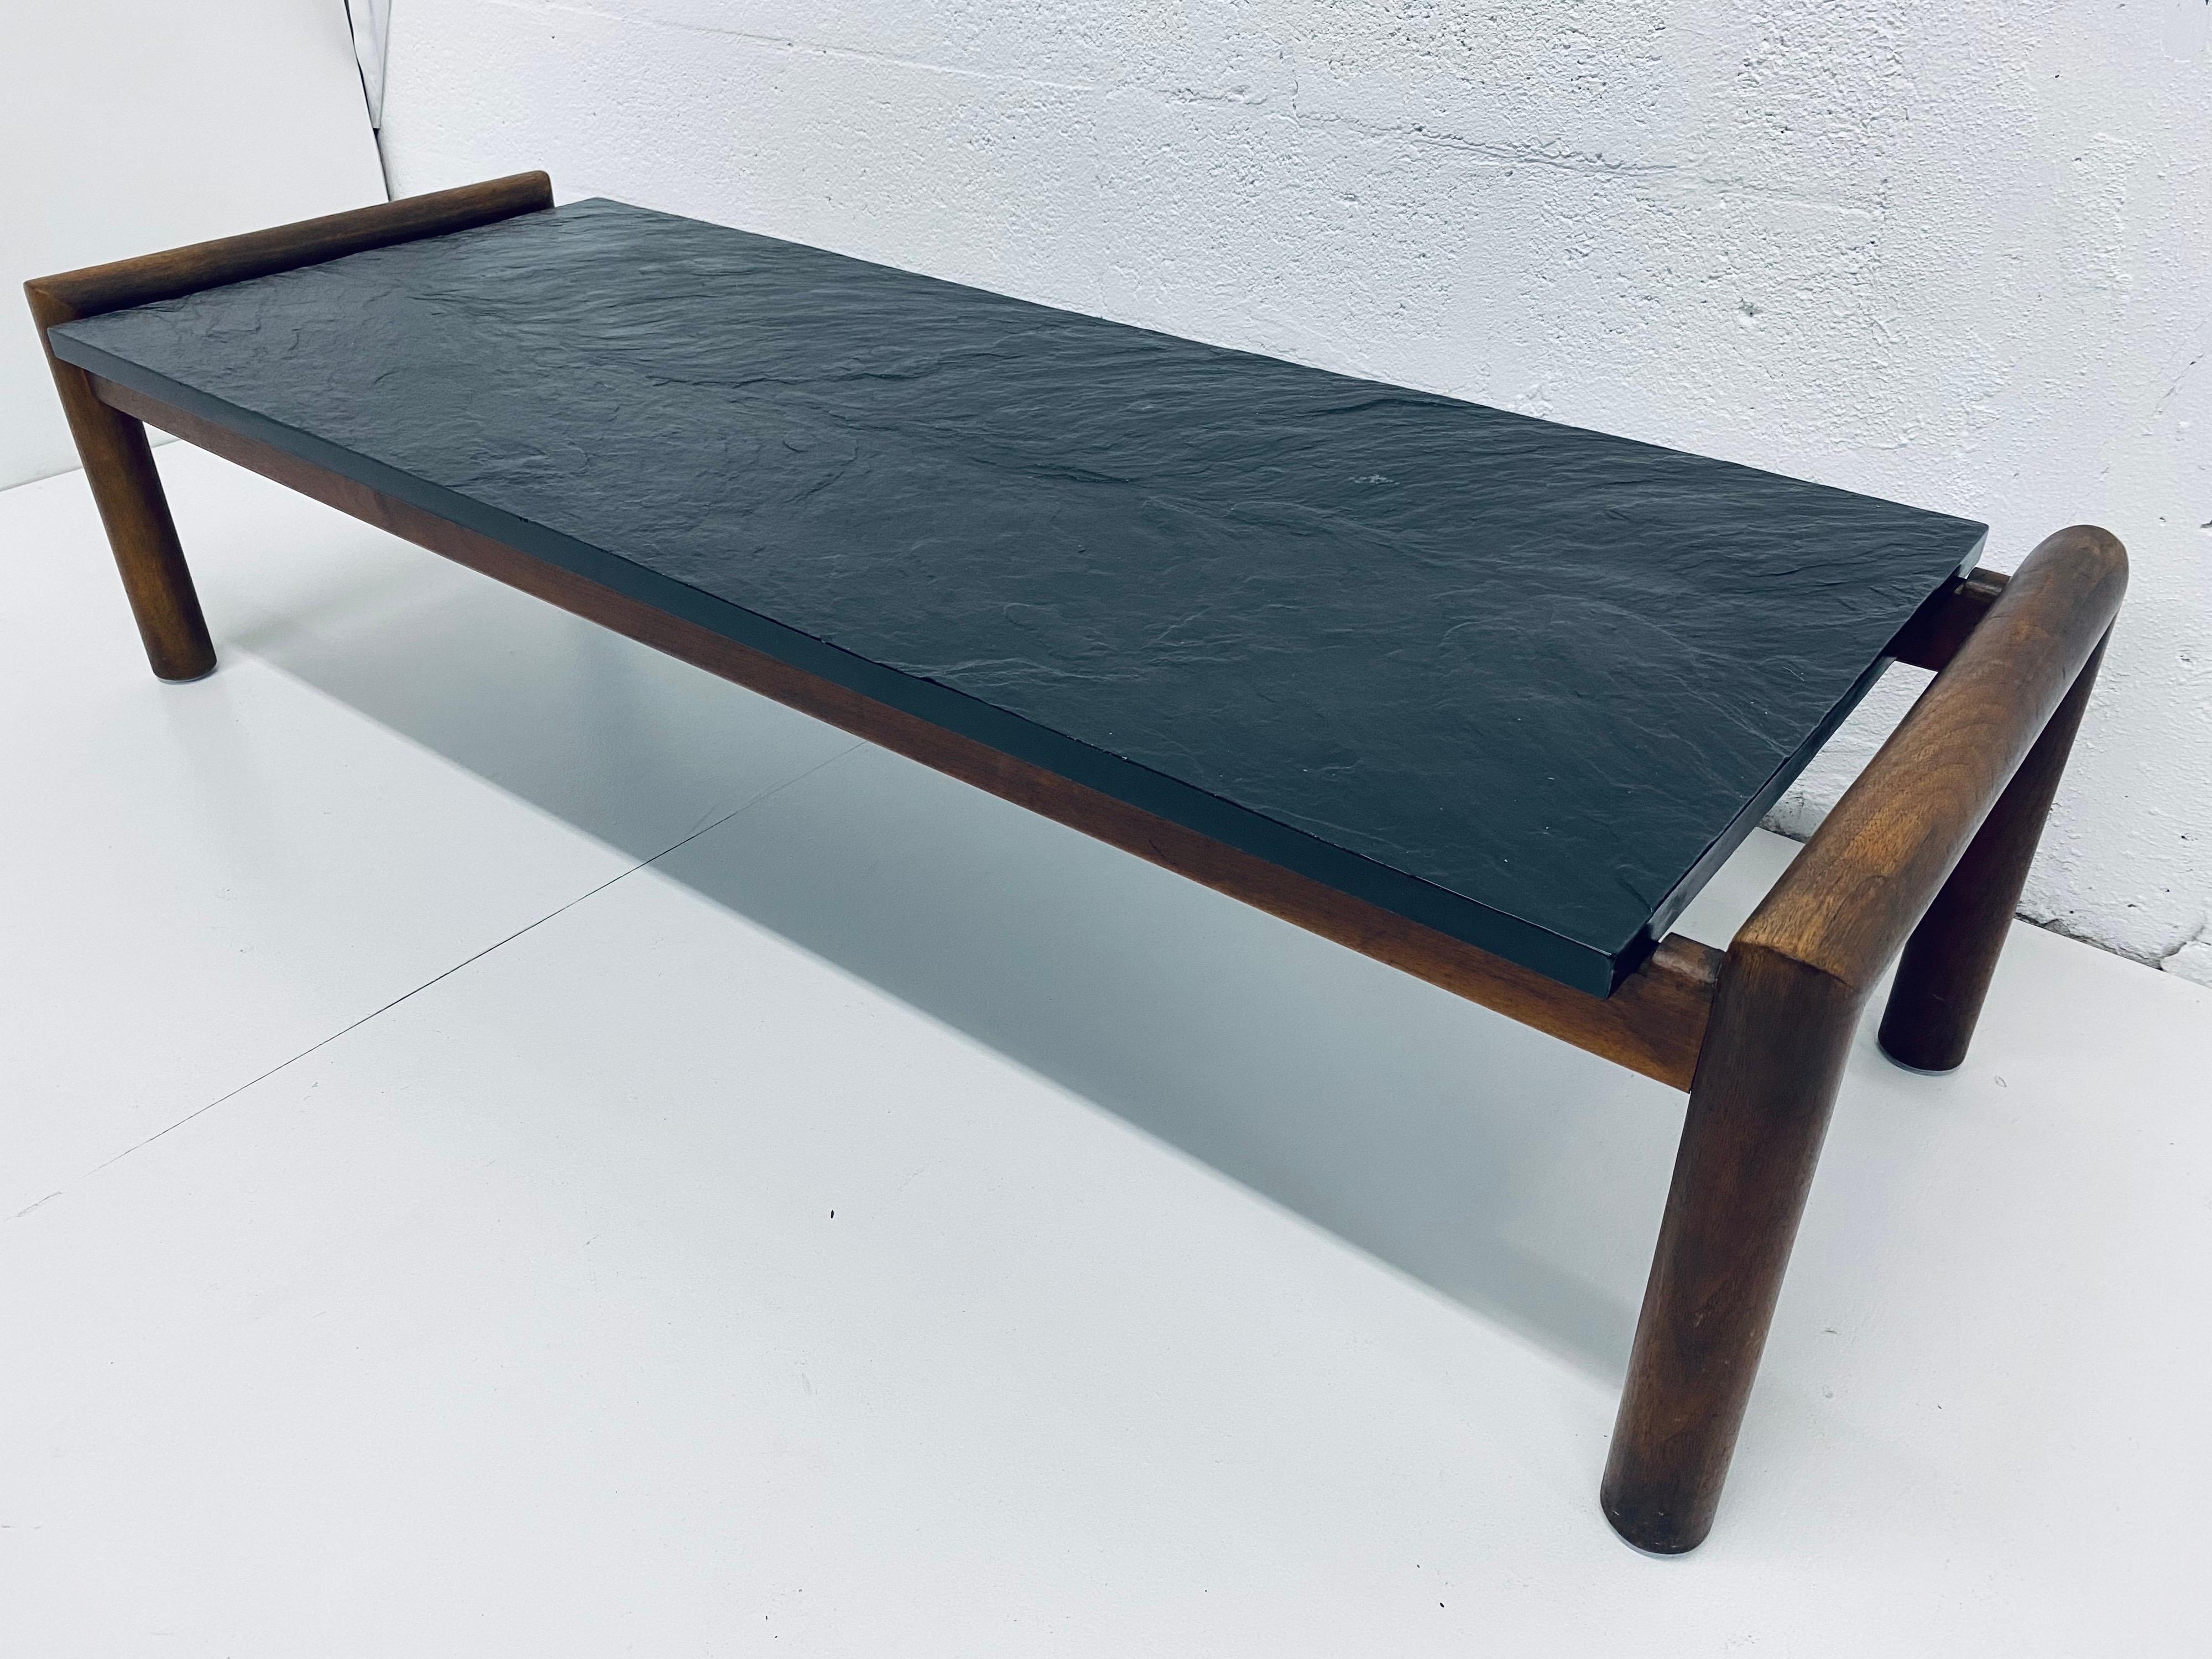 Midcentury black slate top on a walnut base coffee or cocktail table designed by Adrian Pearsall for Craft Associates.